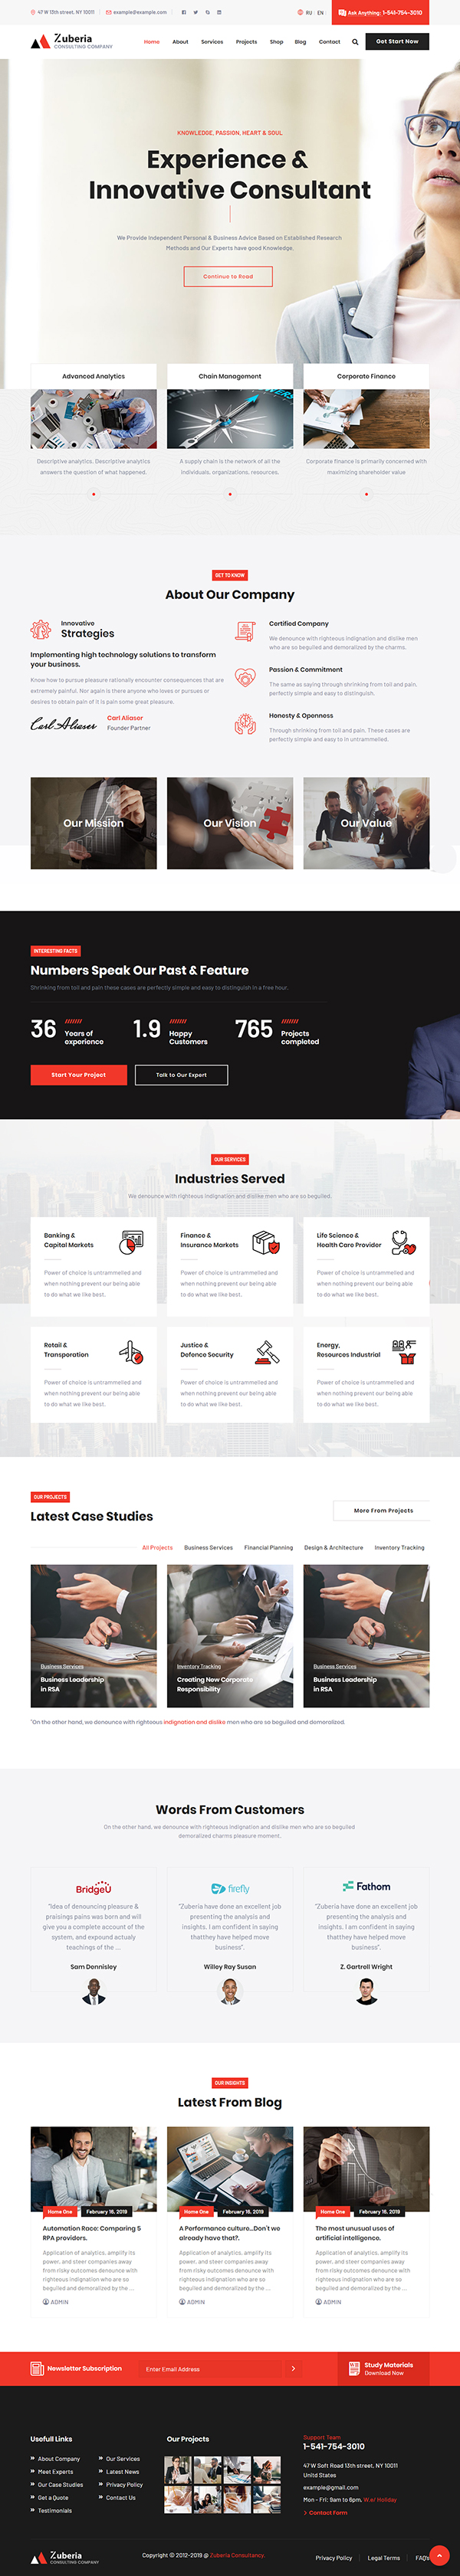 Zuberia - Business Consulting Services WordPress Theme